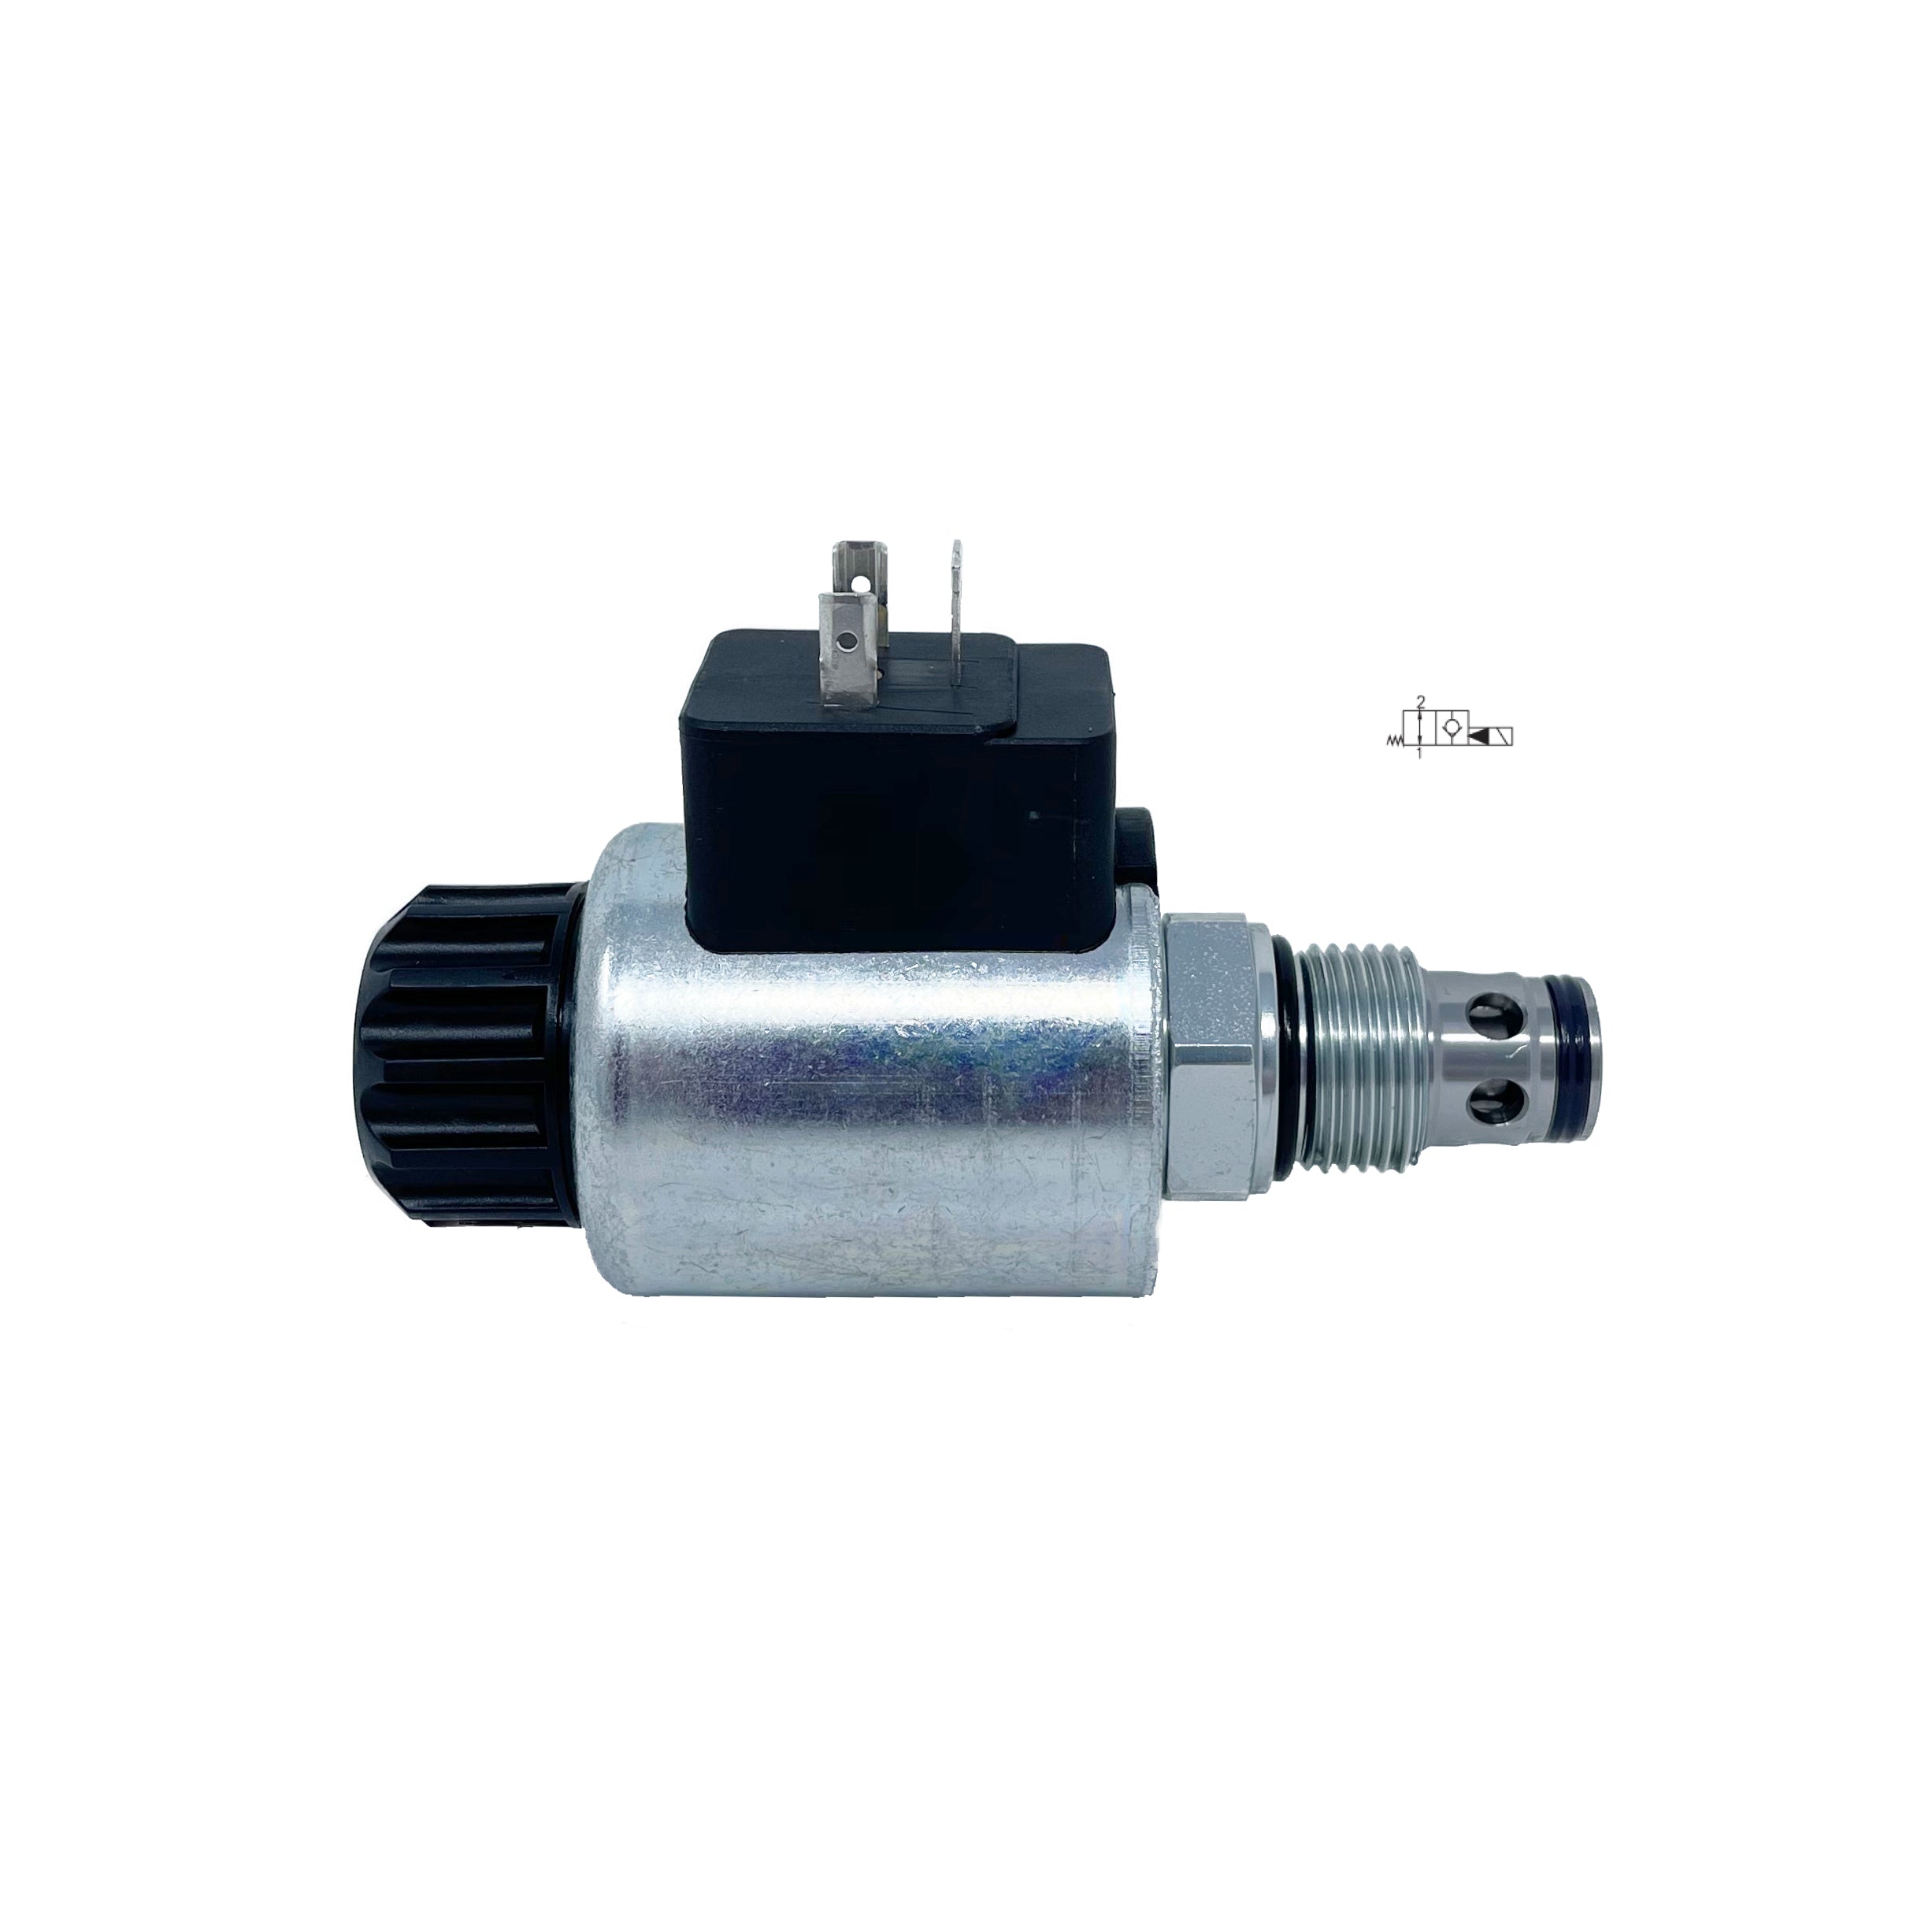 SD3E-B2/H2O2A120DIN : Argo DCV, 16GPM, 5100psi, 2P2W, C-10-2, 120 VAC DIN, Flow 1 to 2 Neutral